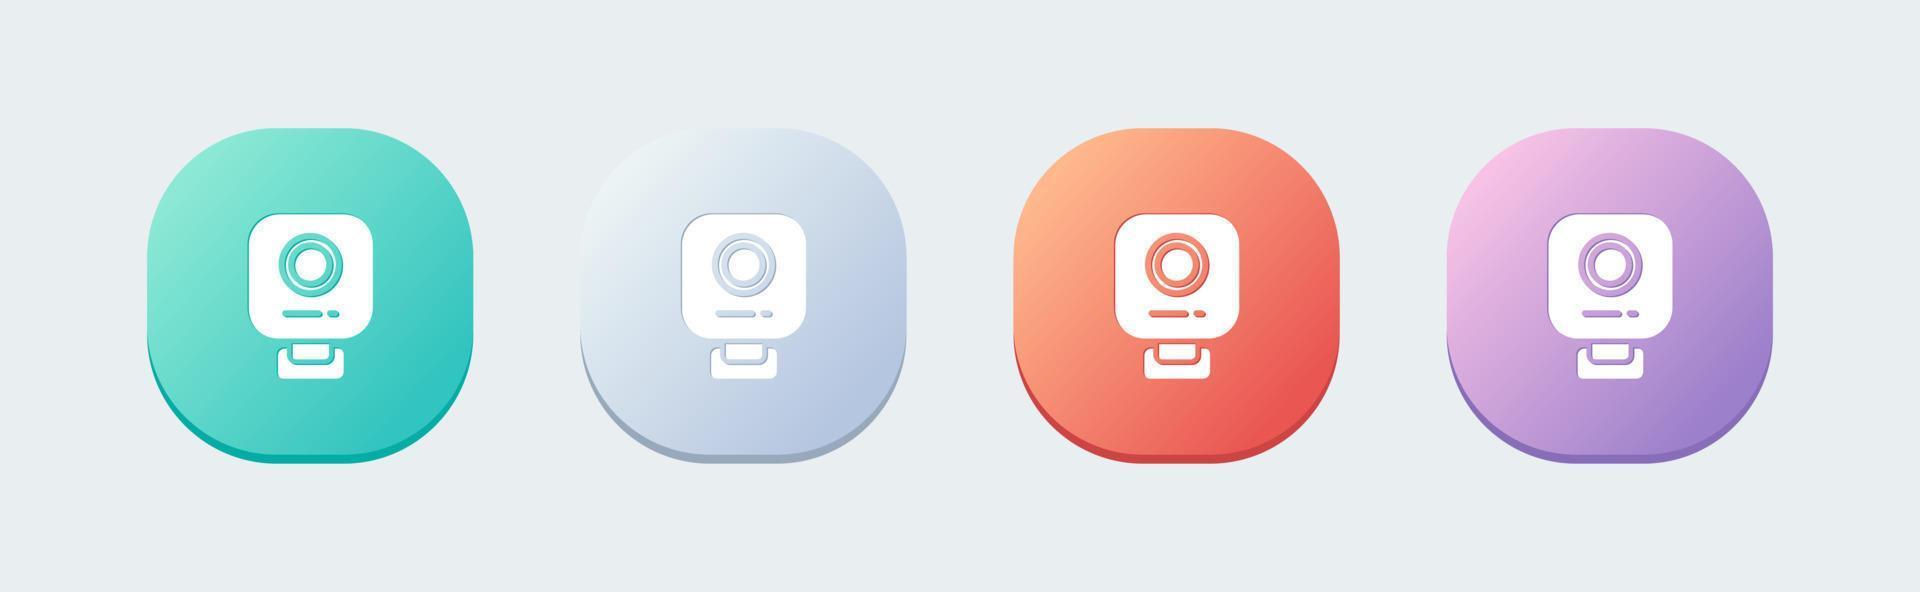 Webcam solid icon in flat design style. Video camera signs vector illustration.